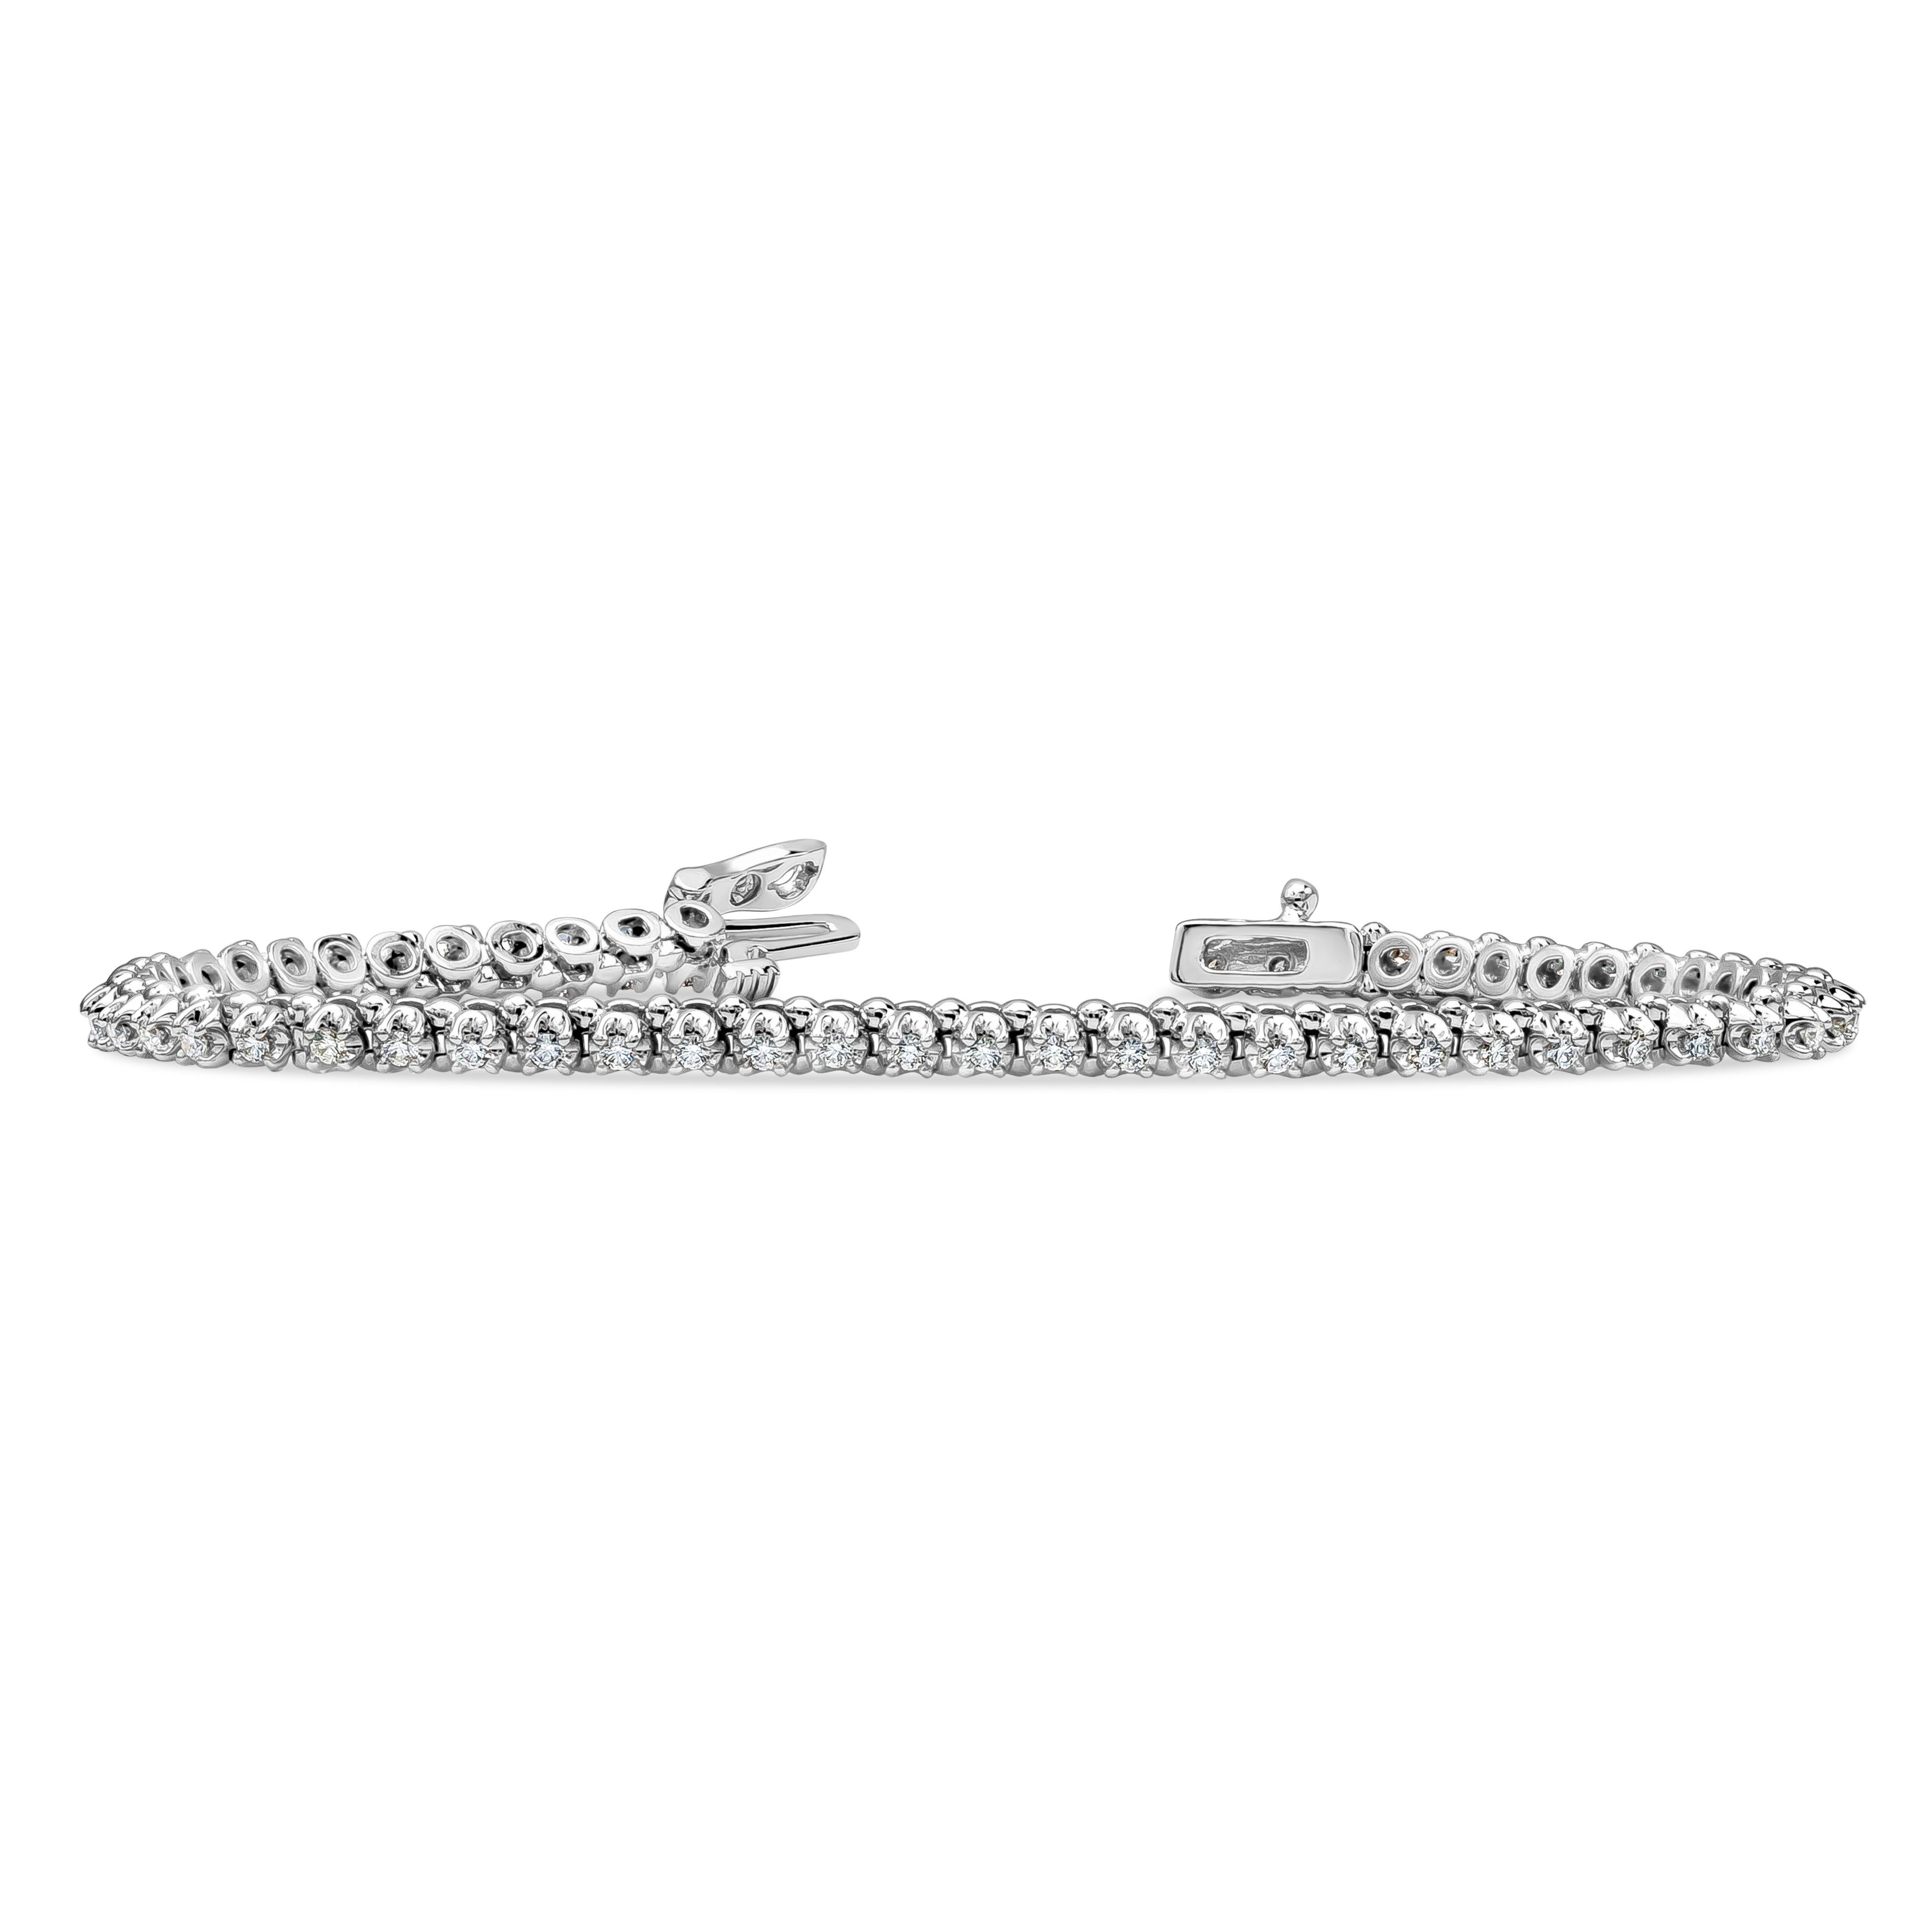 A classic tennis bracelet style showcasing 56 brilliant round diamonds weighing 0.88 carats total, F Color and VS2 in Clarity. 1.50mm Width and 7 inches in Length, Made with 14K White Gold

Style available in different price ranges. Prices are based